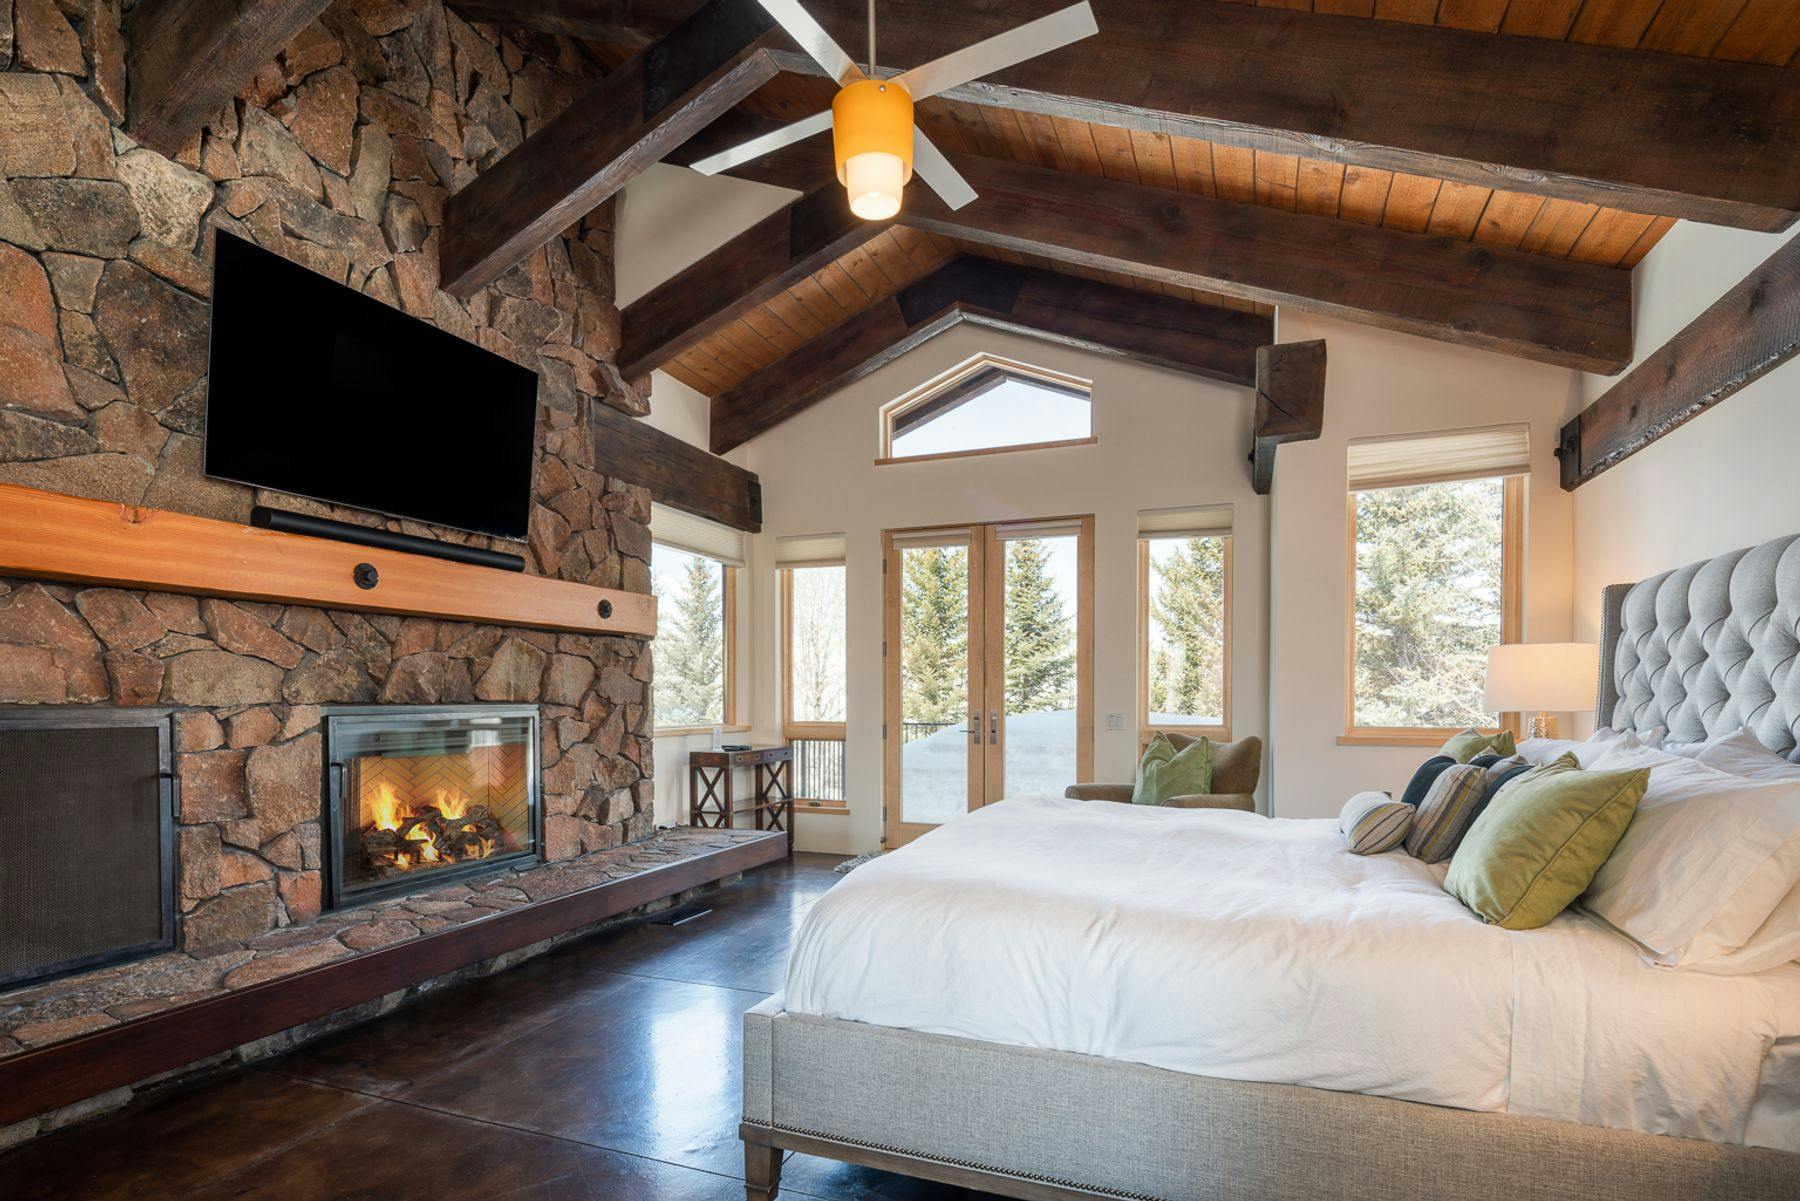 Bedroom in Sun Valley vacation home with fireplace and views